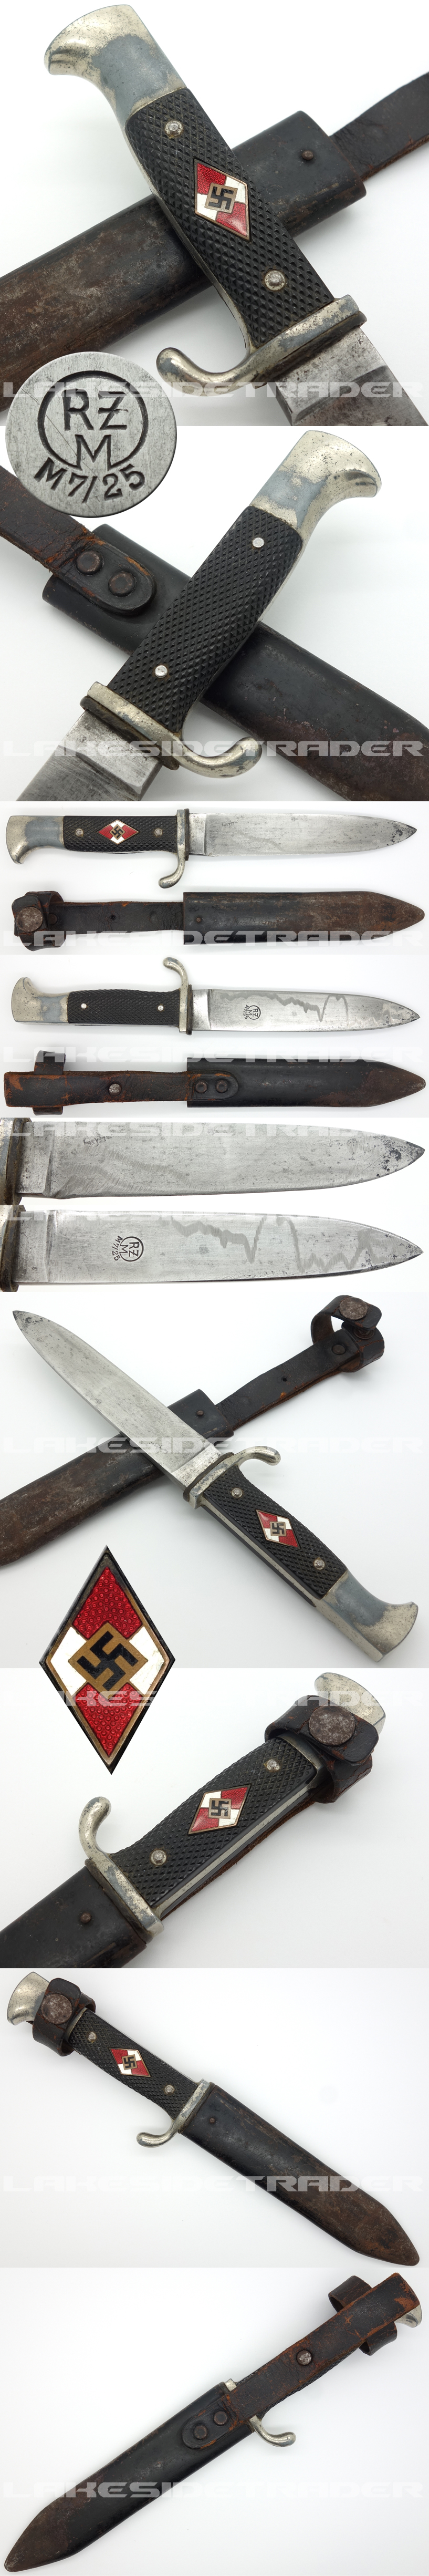 Hitler Youth Knife by RZM M7/25 - Wilhelm Wagner